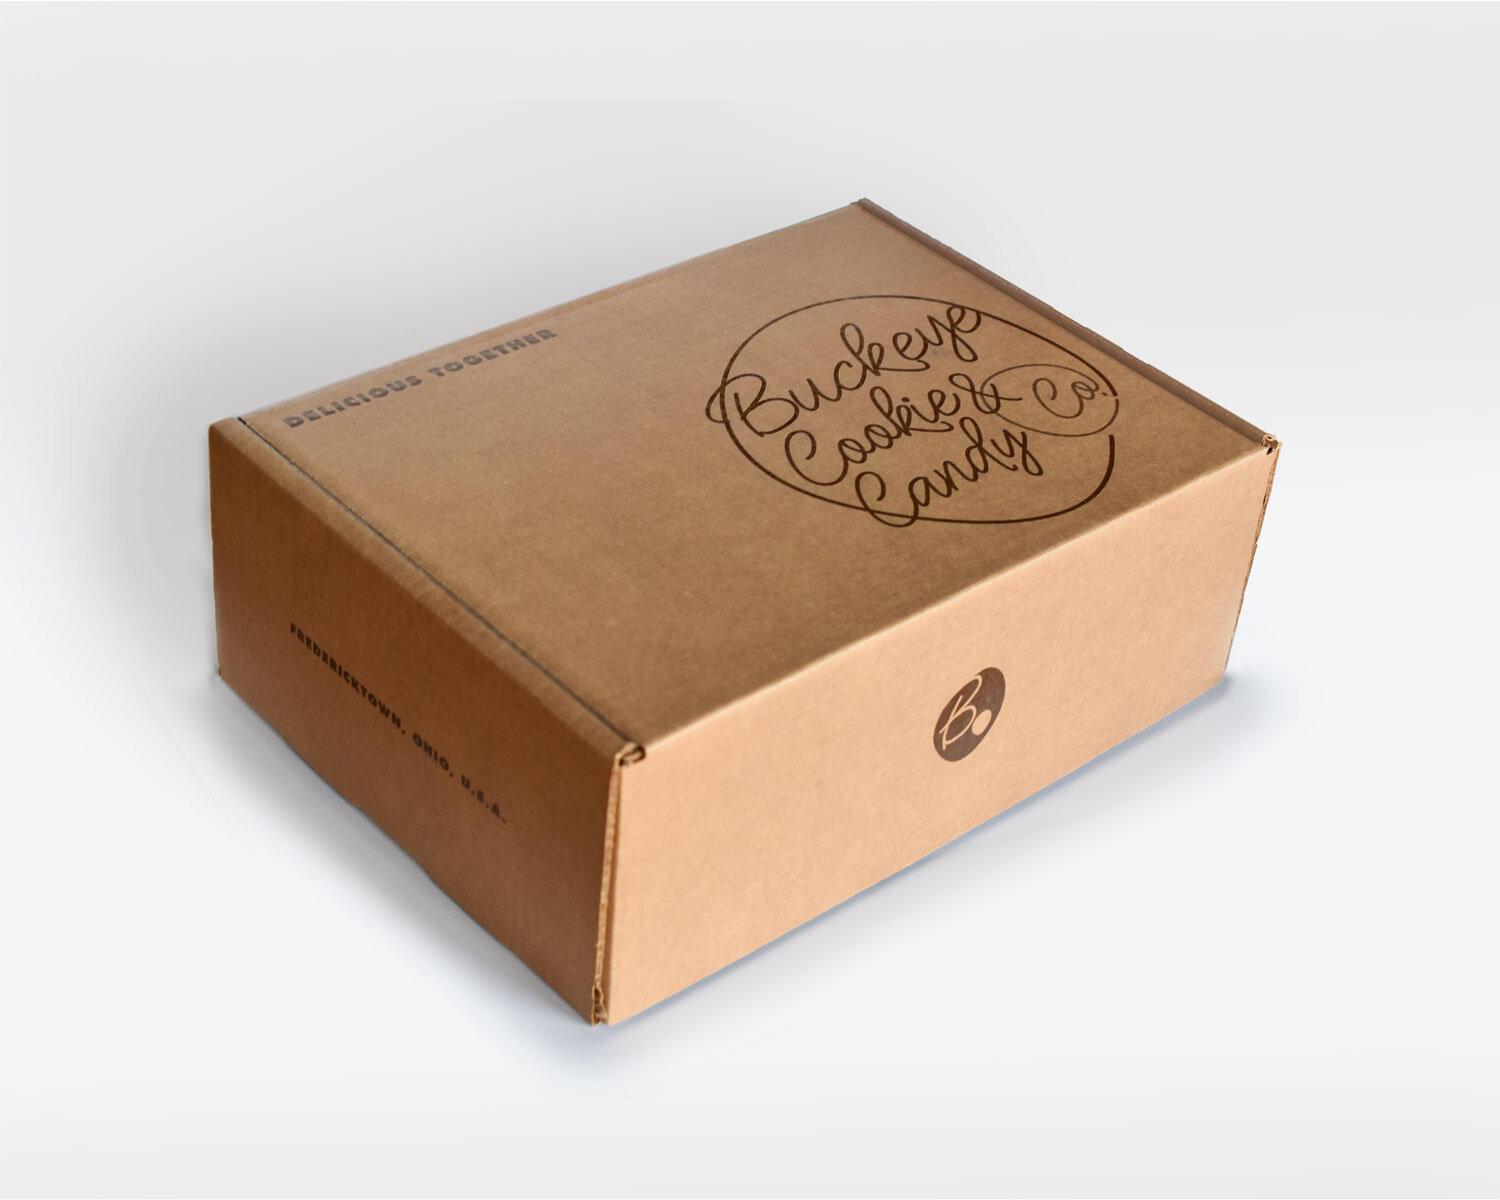 Cookie & Candy Boxes, Wholesale Packaging Boxes